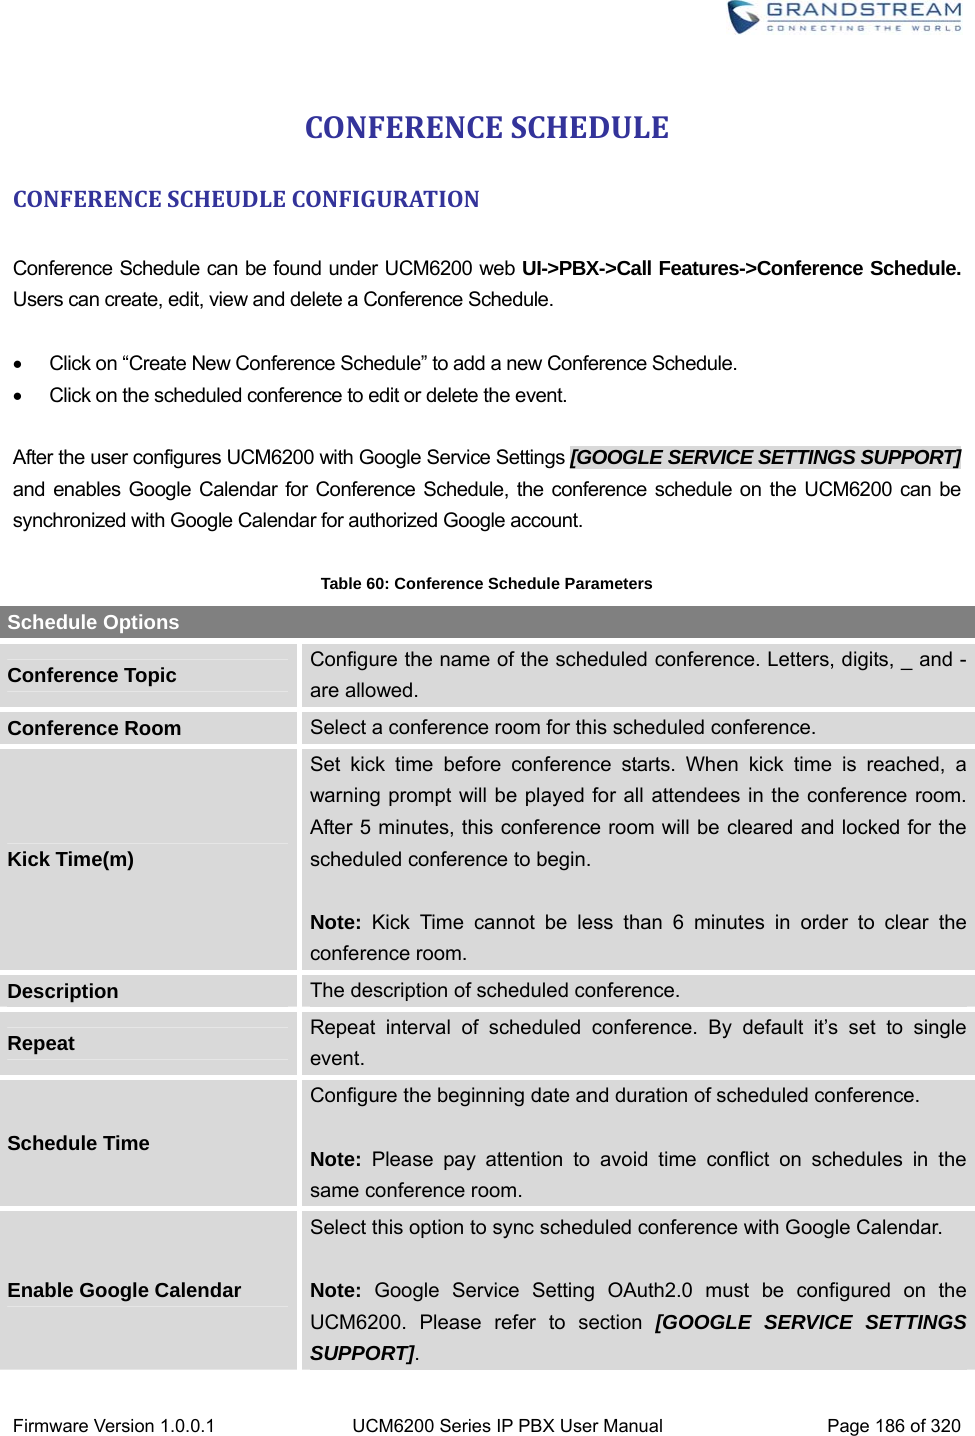  Firmware Version 1.0.0.1  UCM6200 Series IP PBX User Manual  Page 186 of 320 CONFERENCESCHEDULECONFERENCESCHEUDLECONFIGURATION Conference Schedule can be found under UCM6200 web UI-&gt;PBX-&gt;Call Features-&gt;Conference Schedule. Users can create, edit, view and delete a Conference Schedule.      Click on “Create New Conference Schedule” to add a new Conference Schedule.   Click on the scheduled conference to edit or delete the event.  After the user configures UCM6200 with Google Service Settings [GOOGLE SERVICE SETTINGS SUPPORT] and enables Google Calendar for Conference Schedule, the conference schedule on the UCM6200 can be synchronized with Google Calendar for authorized Google account.    Table 60: Conference Schedule Parameters Schedule Options Conference Topic  Configure the name of the scheduled conference. Letters, digits, _ and - are allowed. Conference Room  Select a conference room for this scheduled conference. Kick Time(m) Set kick time before conference starts. When kick time is reached, a warning prompt will be played for all attendees in the conference room. After 5 minutes, this conference room will be cleared and locked for the scheduled conference to begin.  Note: Kick Time cannot be less than 6 minutes in order to clear the conference room.   Description  The description of scheduled conference. Repeat  Repeat interval of scheduled conference. By default it’s set to single event. Schedule Time Configure the beginning date and duration of scheduled conference.    Note: Please pay attention to avoid time conflict on schedules in the same conference room.   Enable Google Calendar Select this option to sync scheduled conference with Google Calendar.    Note: Google Service Setting OAuth2.0 must be configured on the UCM6200. Please refer to section [GOOGLE SERVICE SETTINGS SUPPORT].  